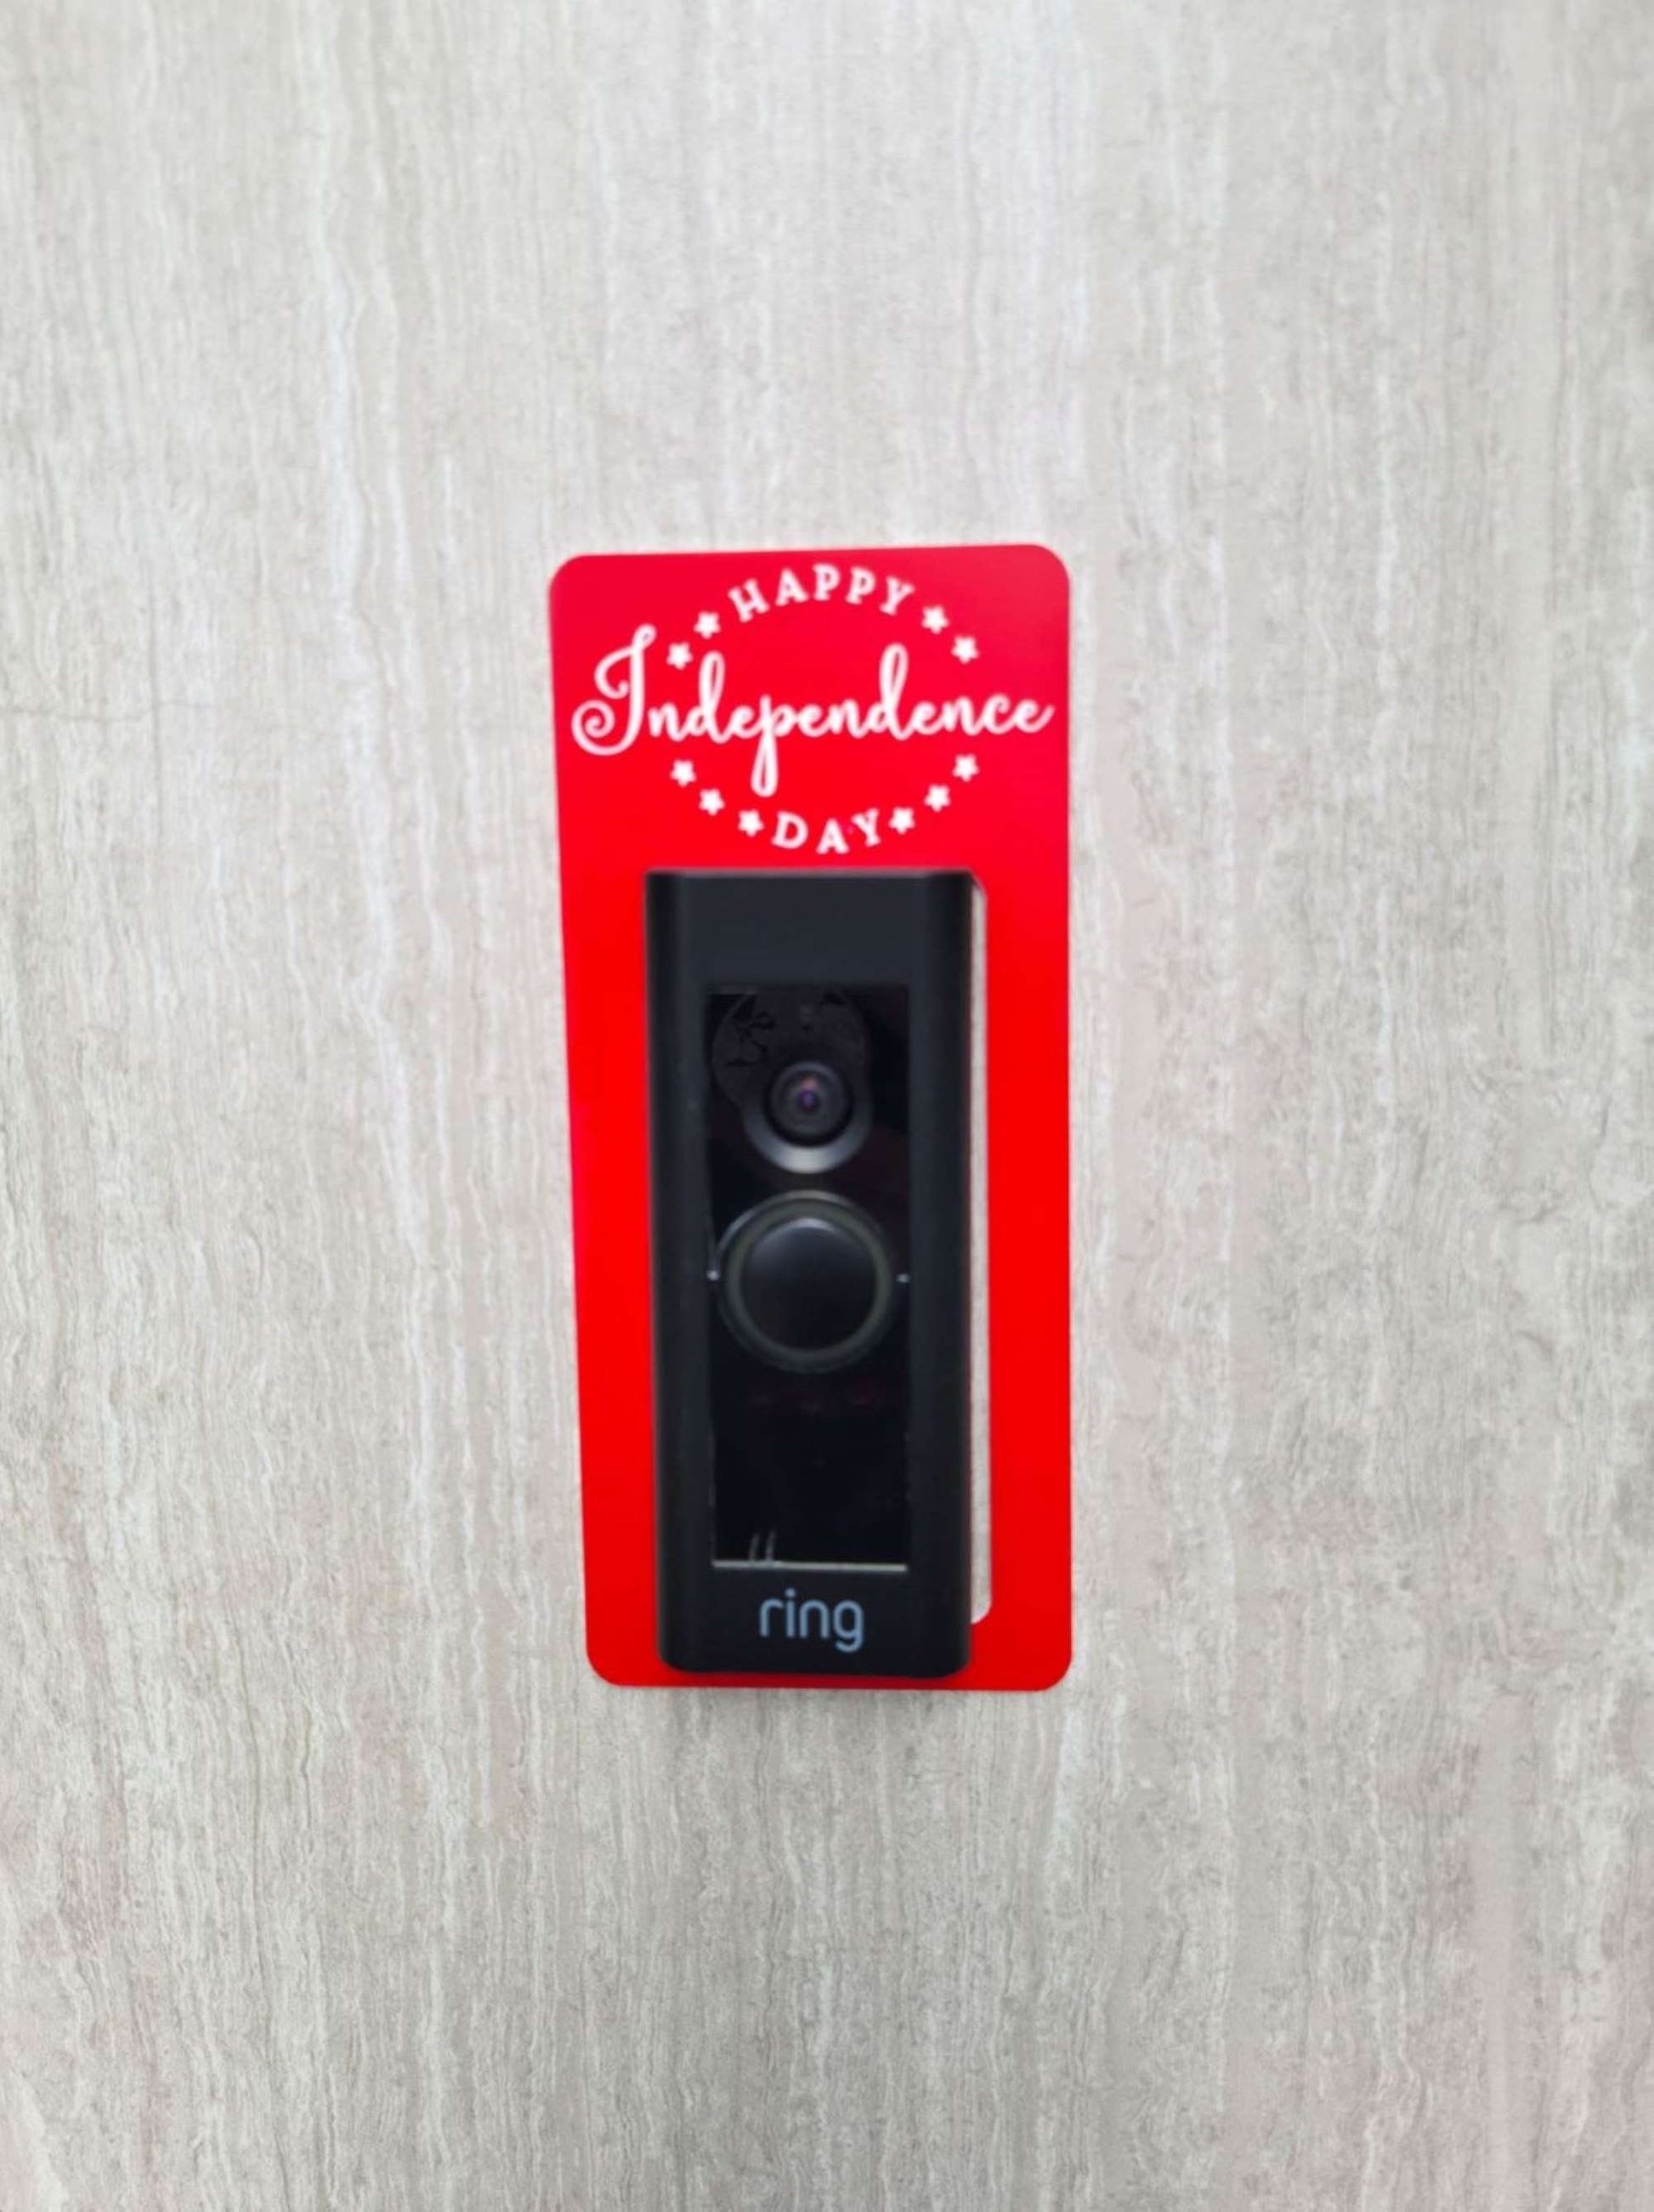 Red laminate doorbell surround with white lettering saying Happy Independence Day and stars on ring doorbell and gray background